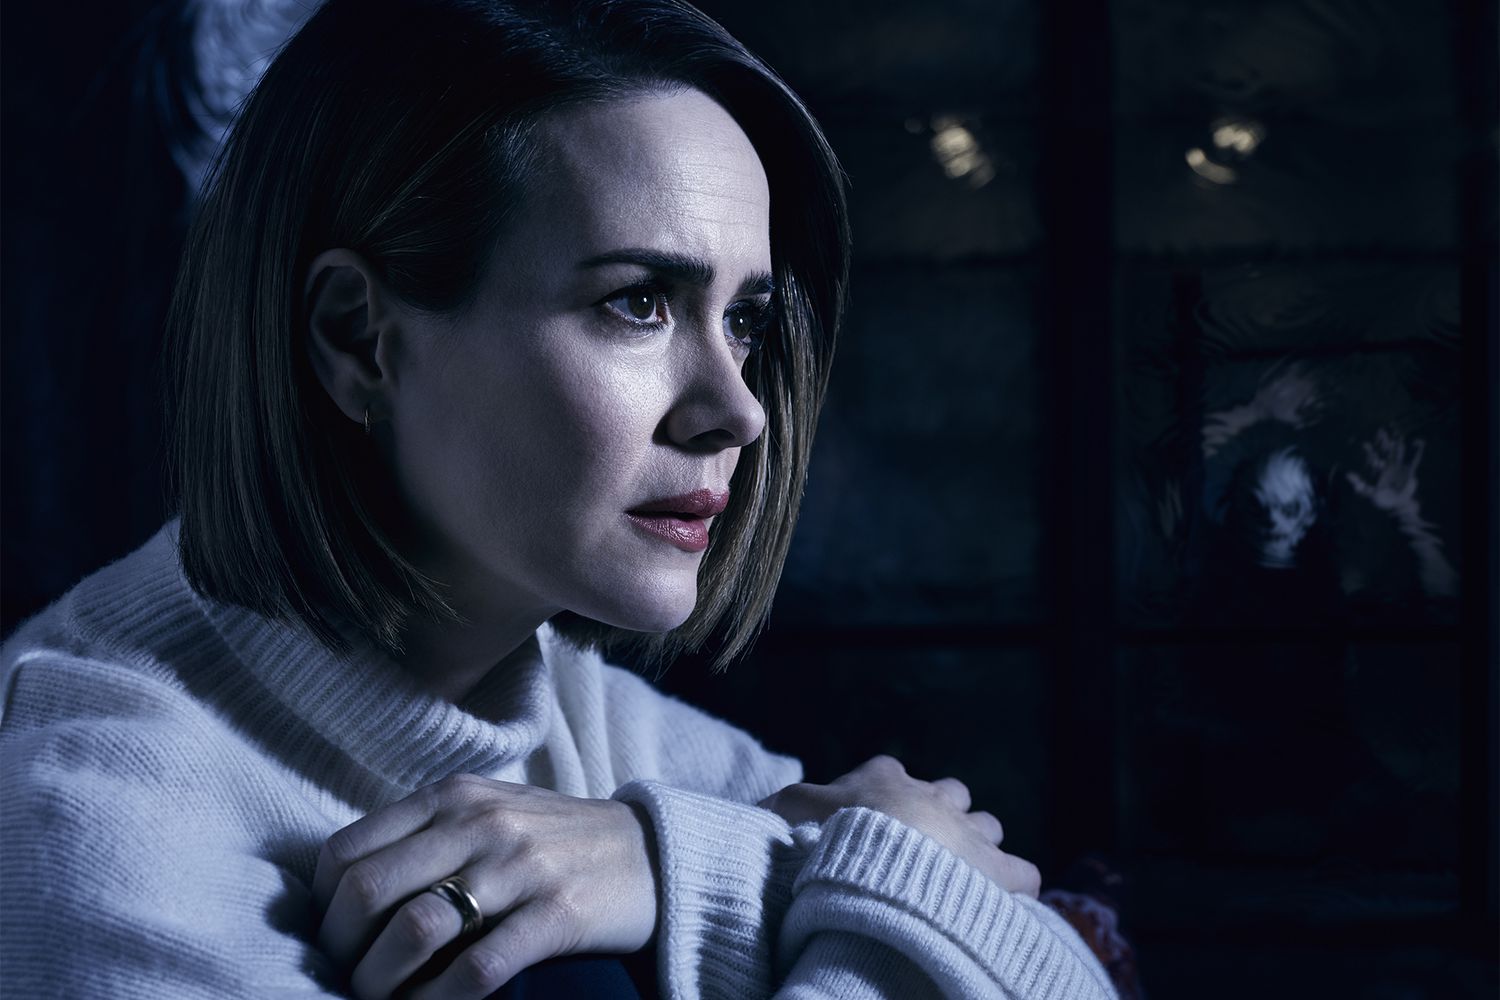 AMERICAN HORROR STORY: CULT Episode: Pilot Pictured: Sarah Paulson as Ally Mayfair-Richards.